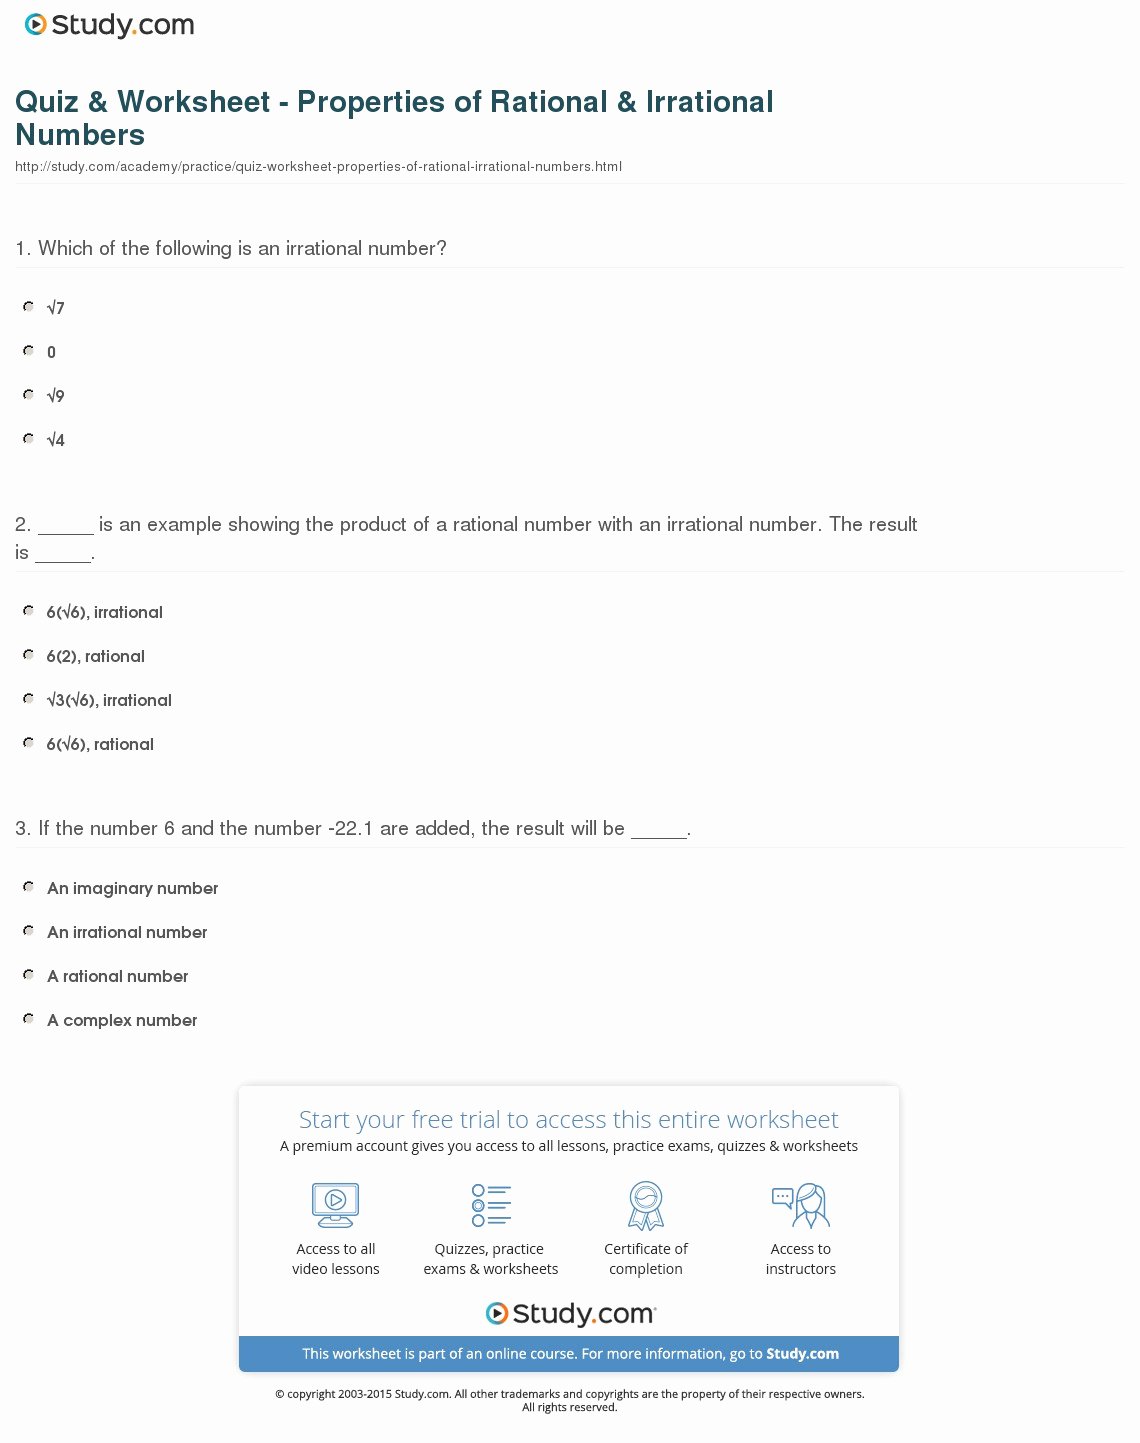 Rational or Irrational Worksheet New Quiz &amp; Worksheet Properties Of Rational &amp; Irrational